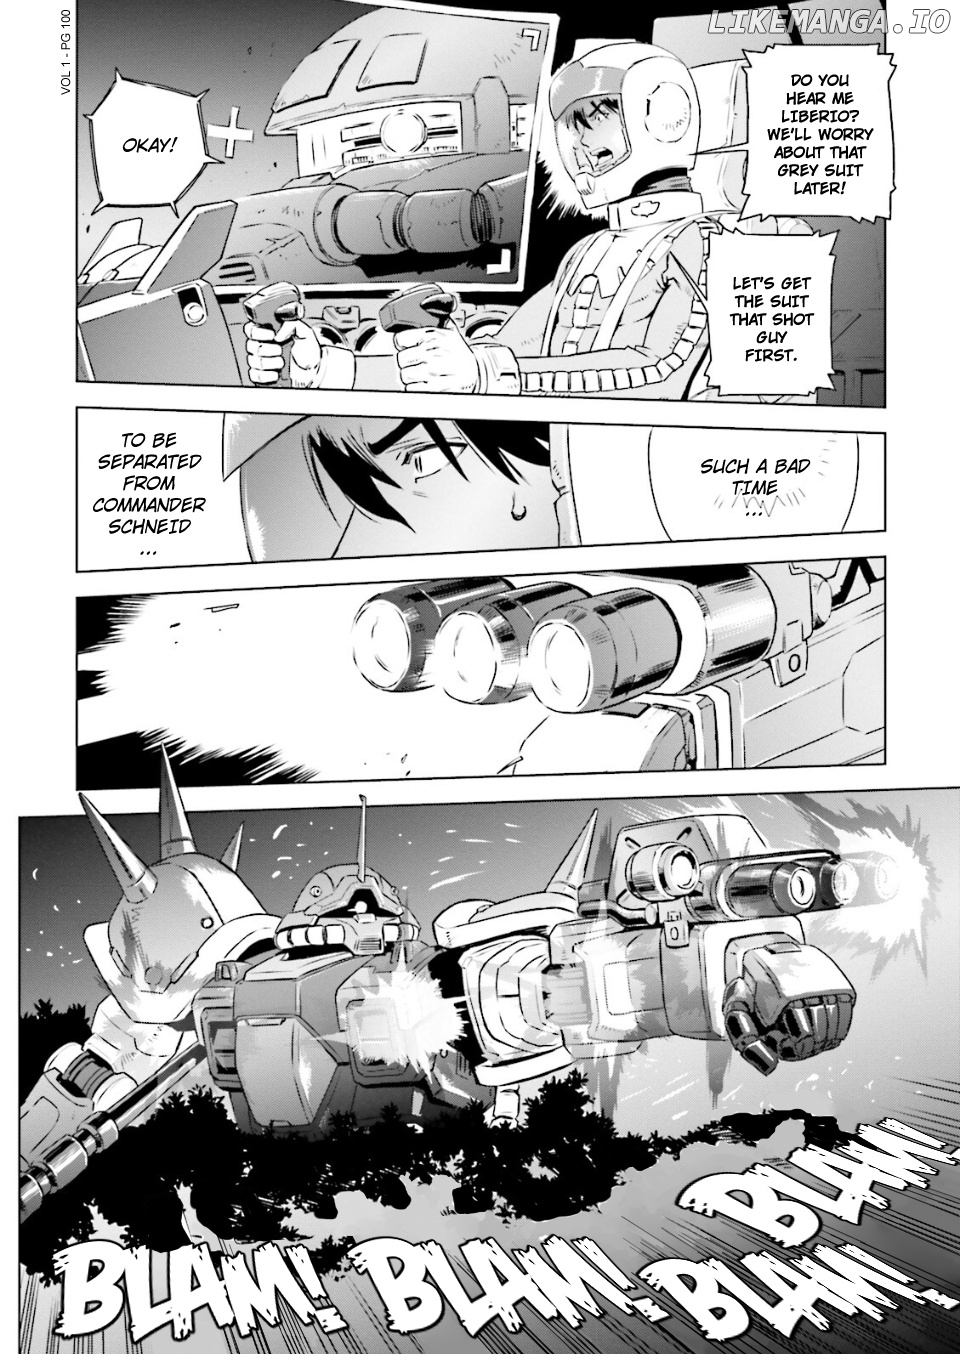 Mobile Suit Gundam Side Story - Missing Link Chapter 4 - page 8